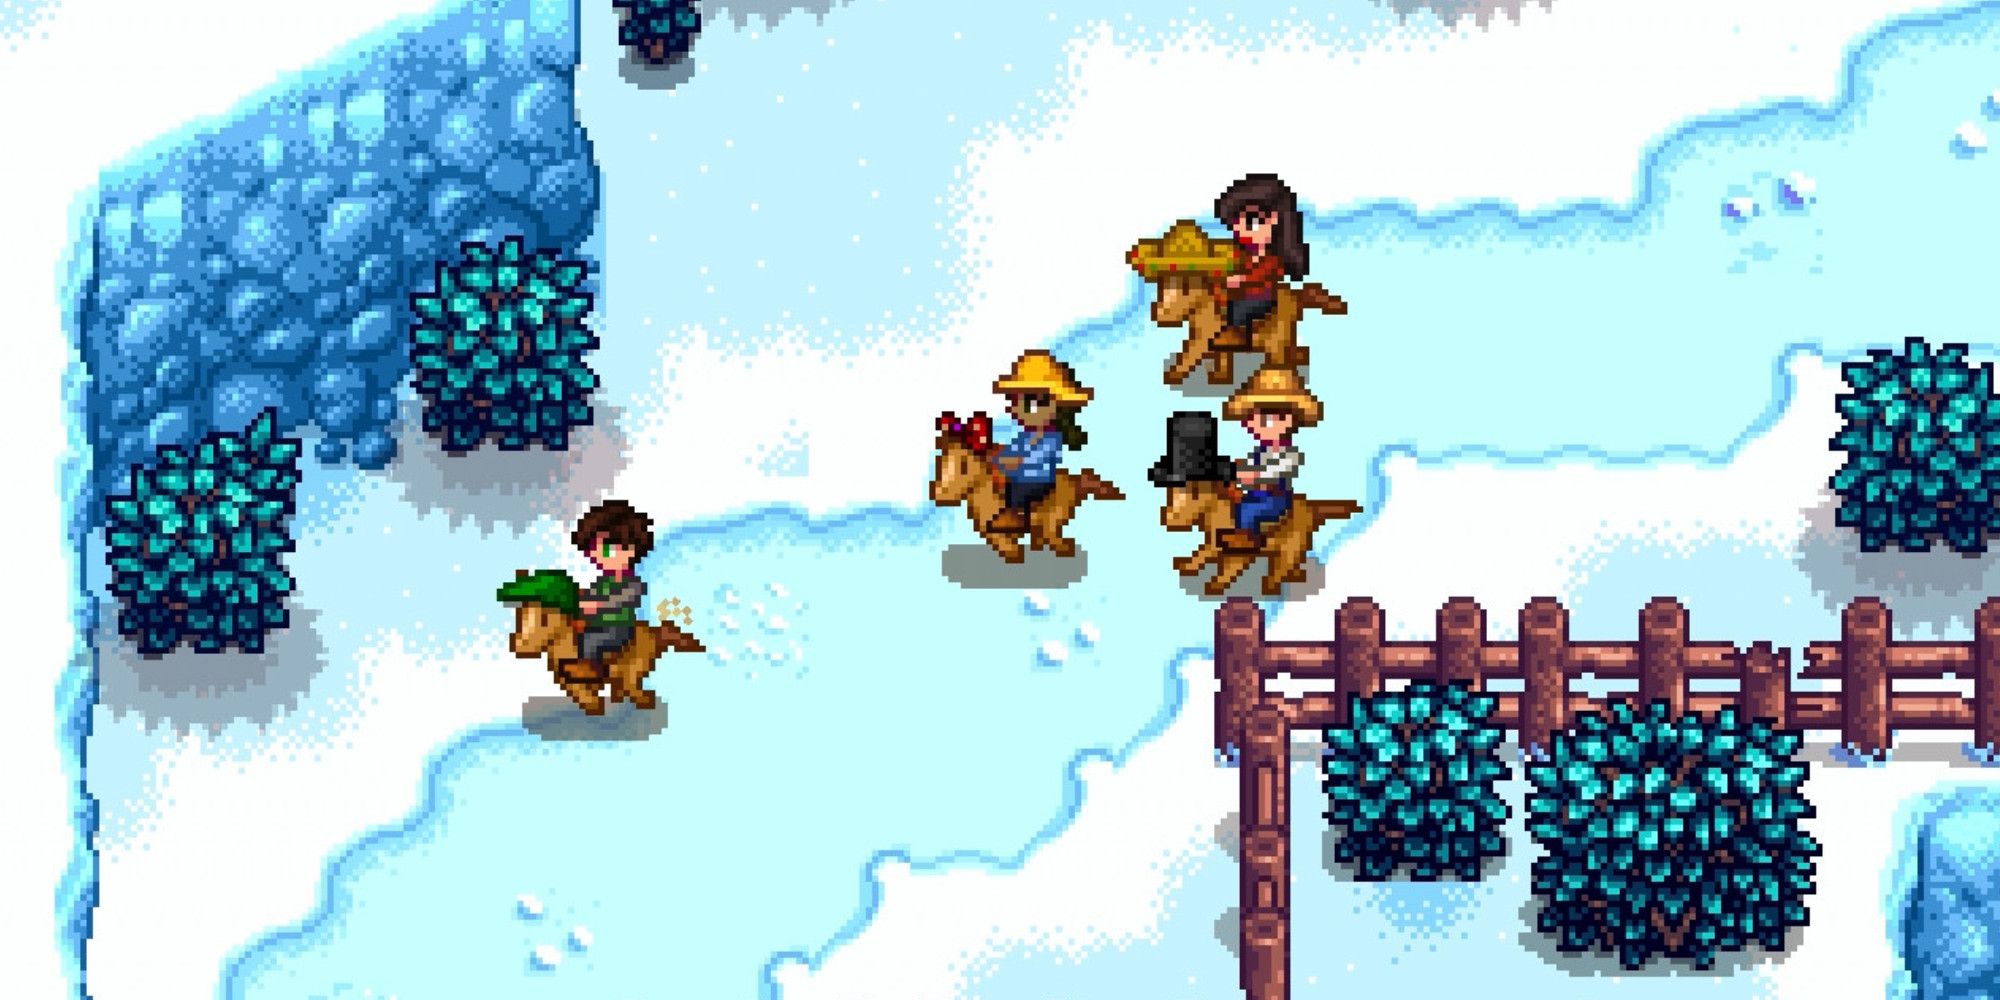 Several Stardew Valley players riding their horses through some snow